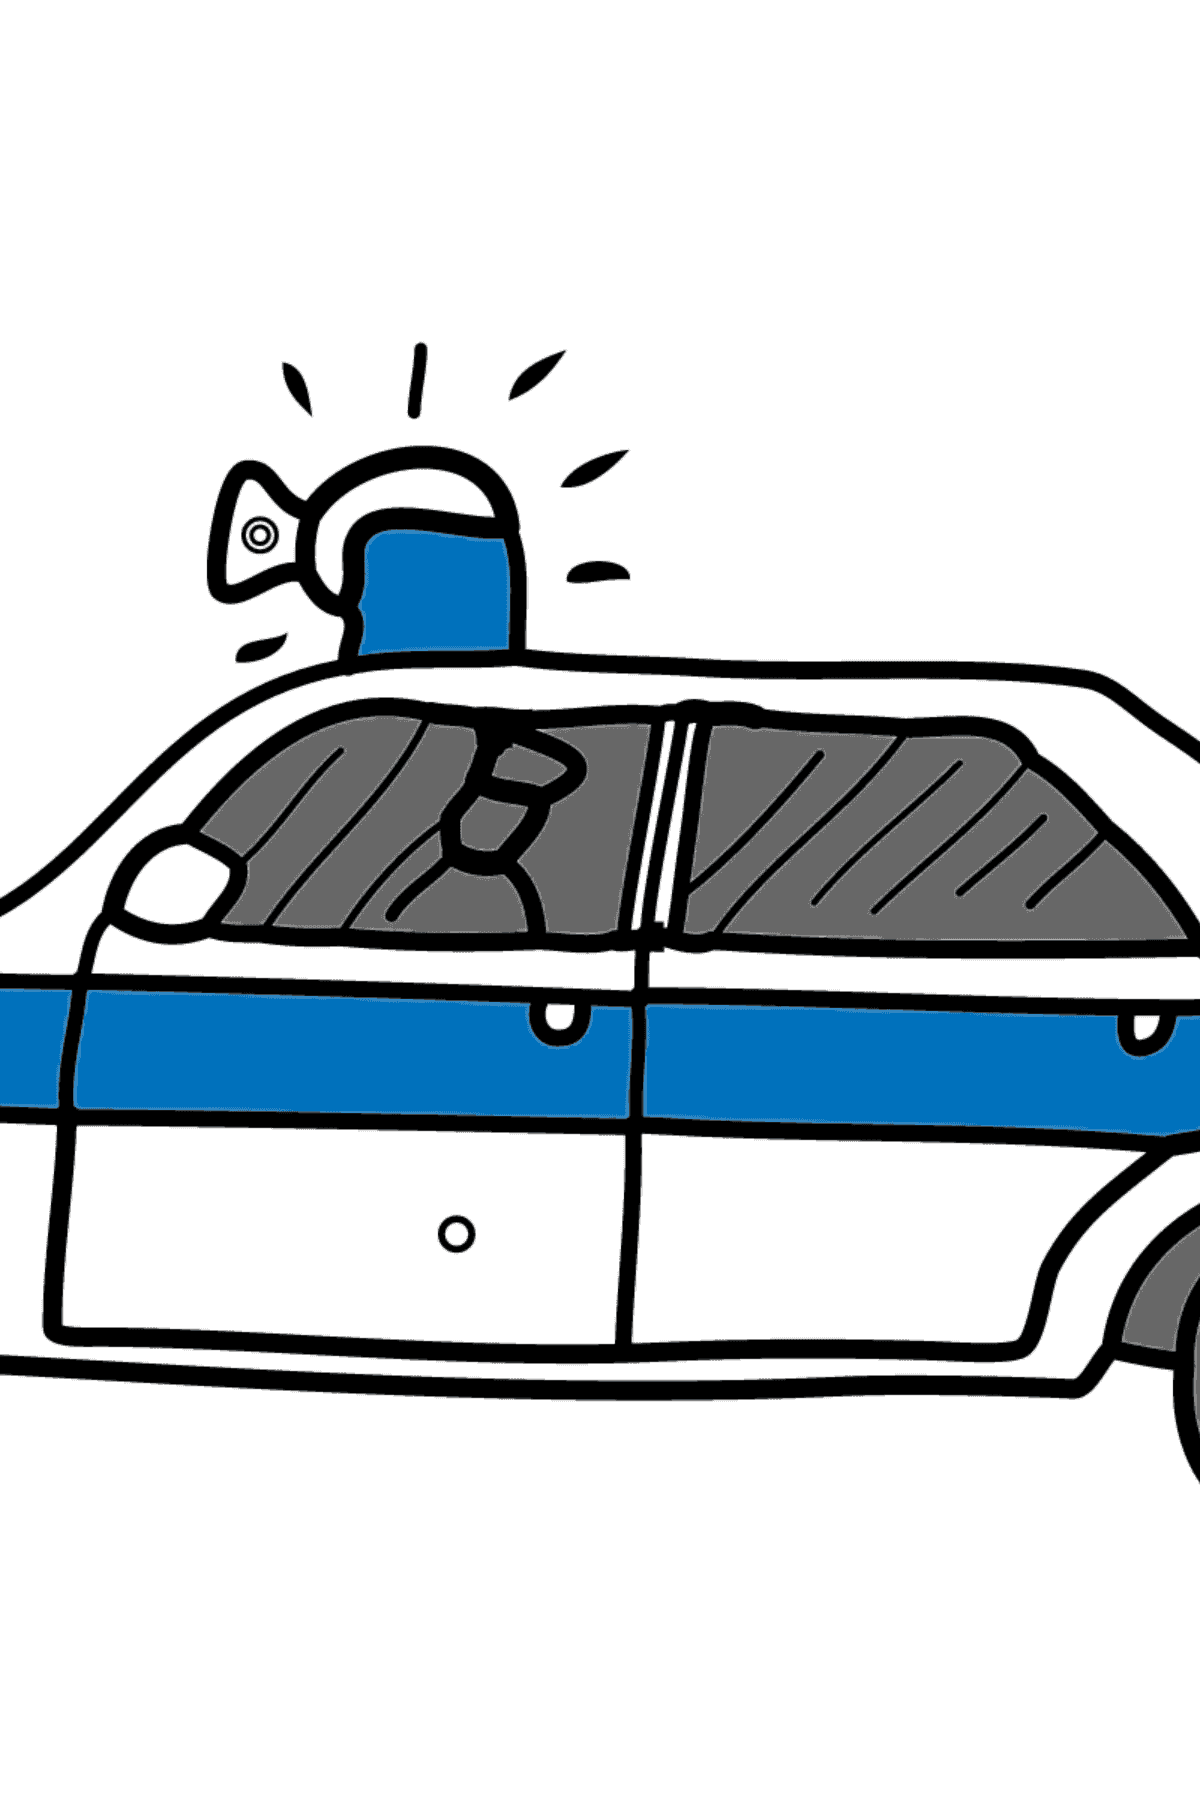 Coloring Page - A Police Car for Children  - Color by Geometric Shapes